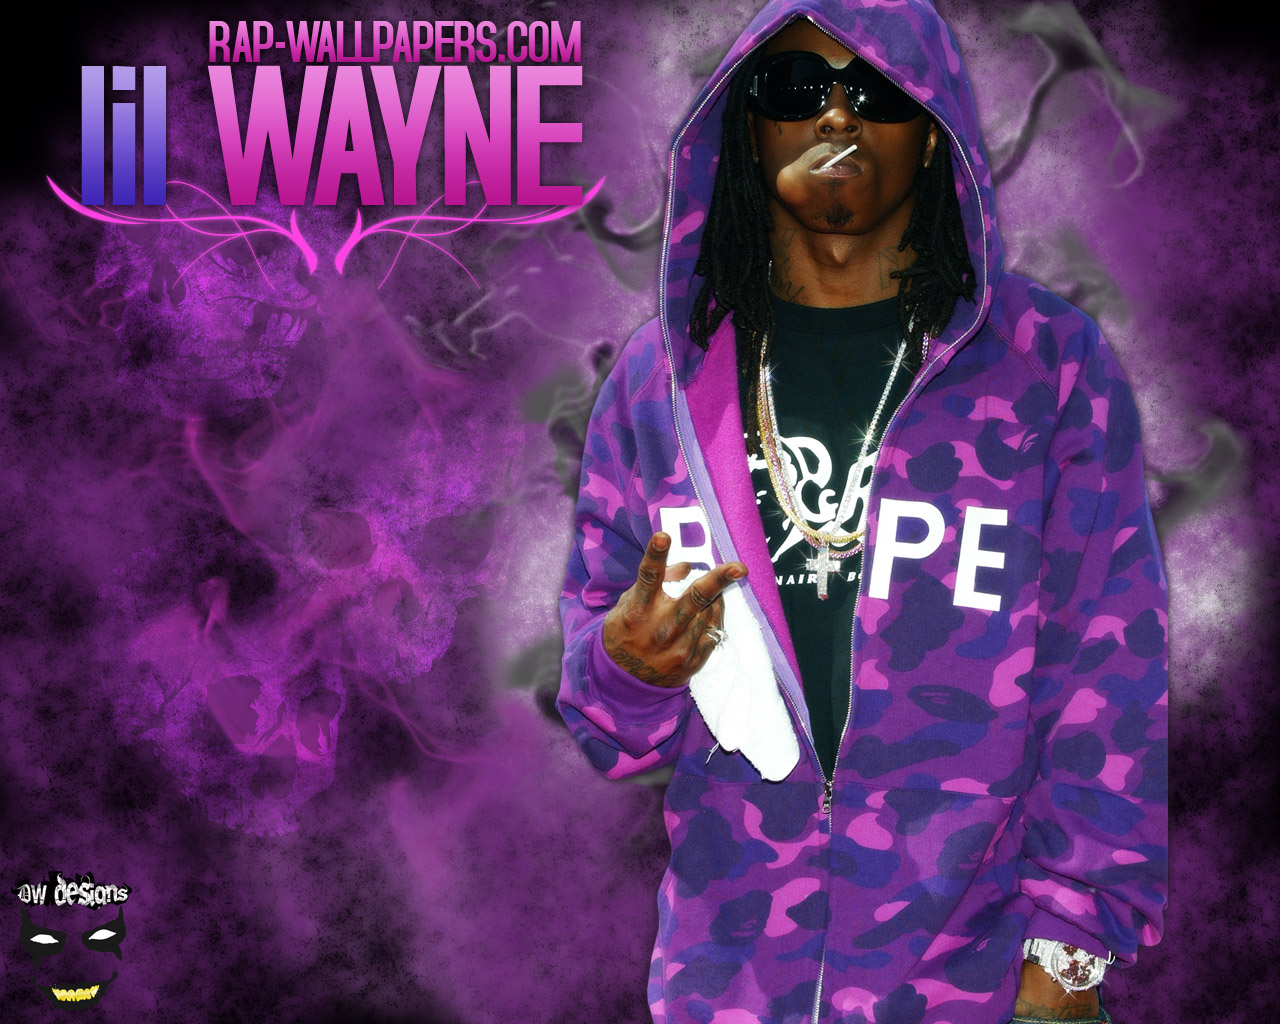 Cool Lil Wayne Picture Wallpapers - HD Wallpapers 23388